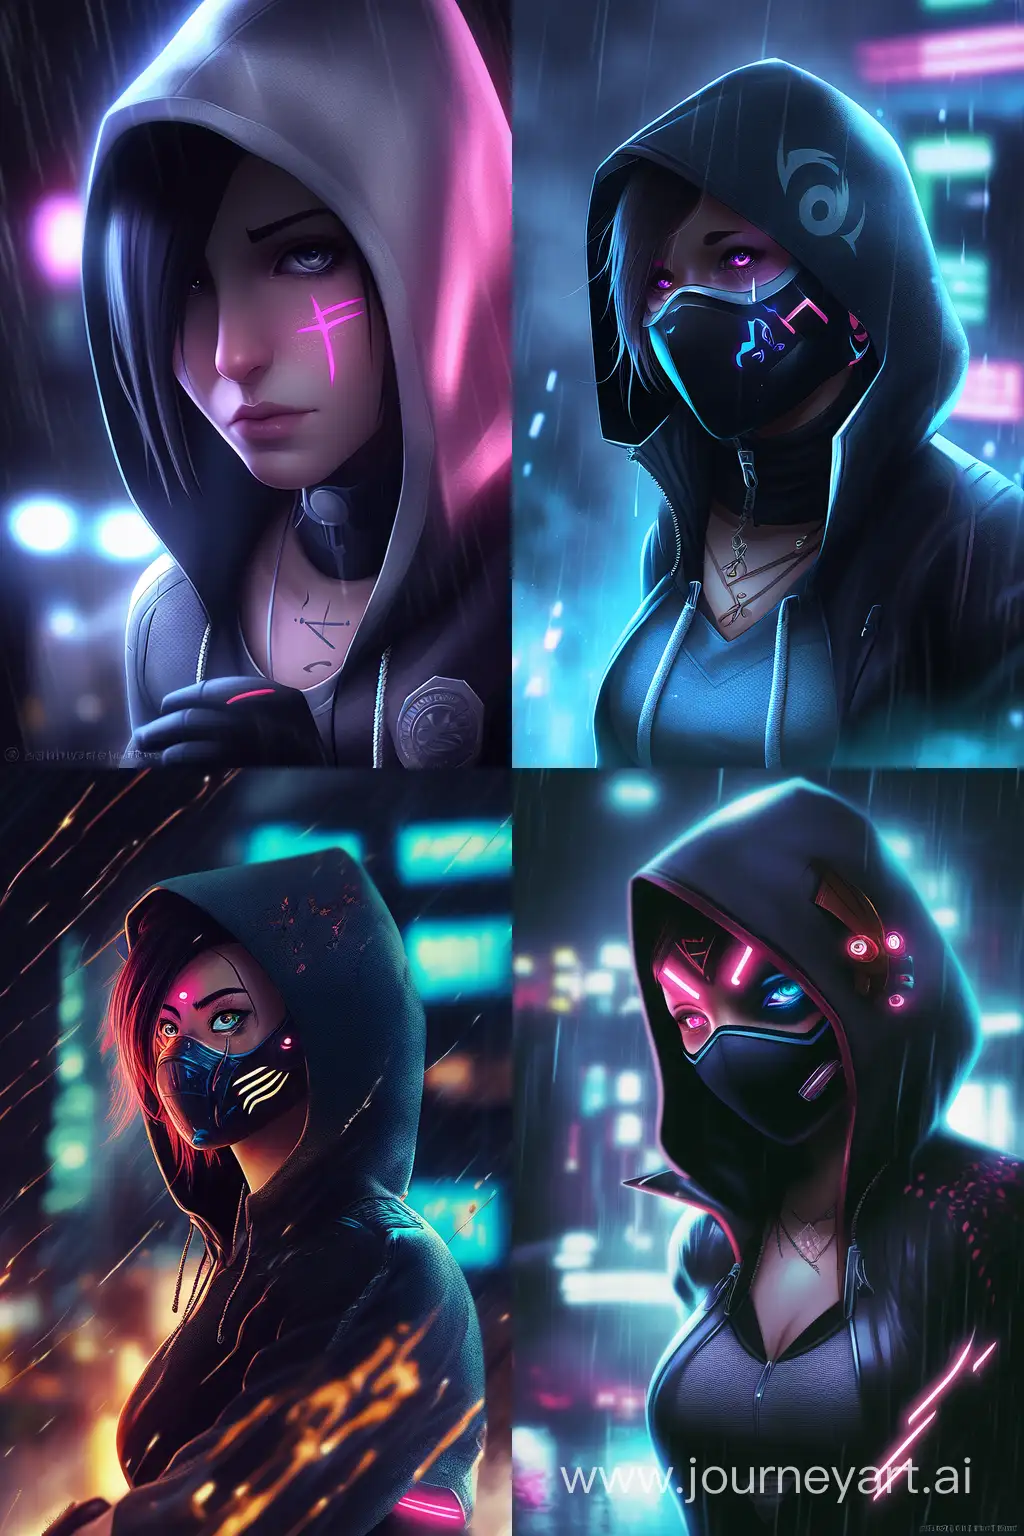 Futuristic-Anime-Character-with-Artistic-Face-Tattoos-in-Cinematic-Rainy-Setting